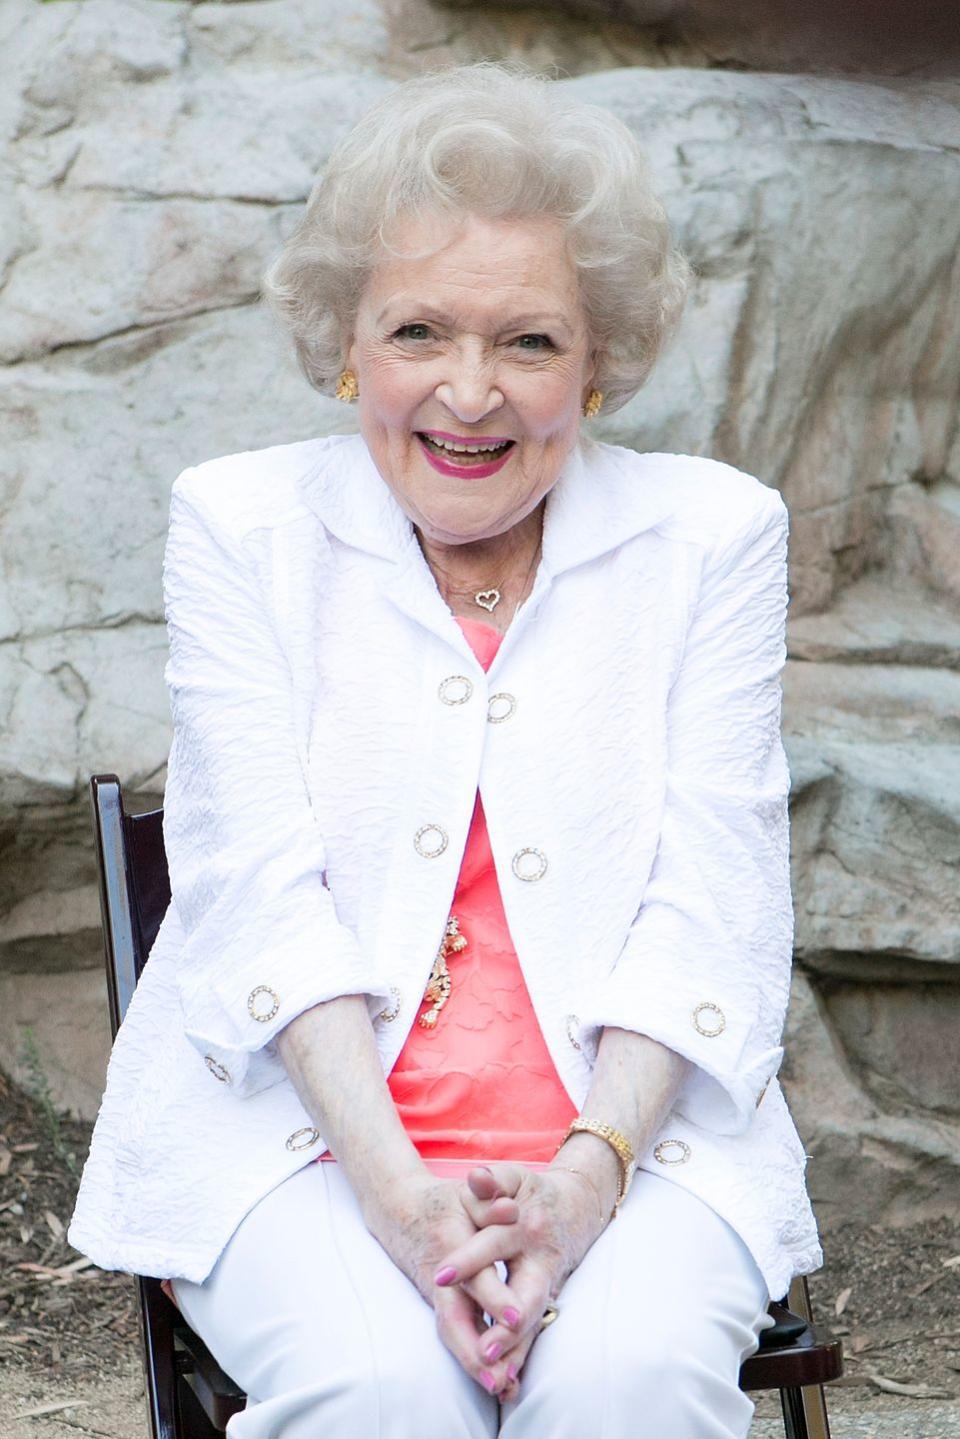 Betty White is the only surviving 'Golden Girl.'